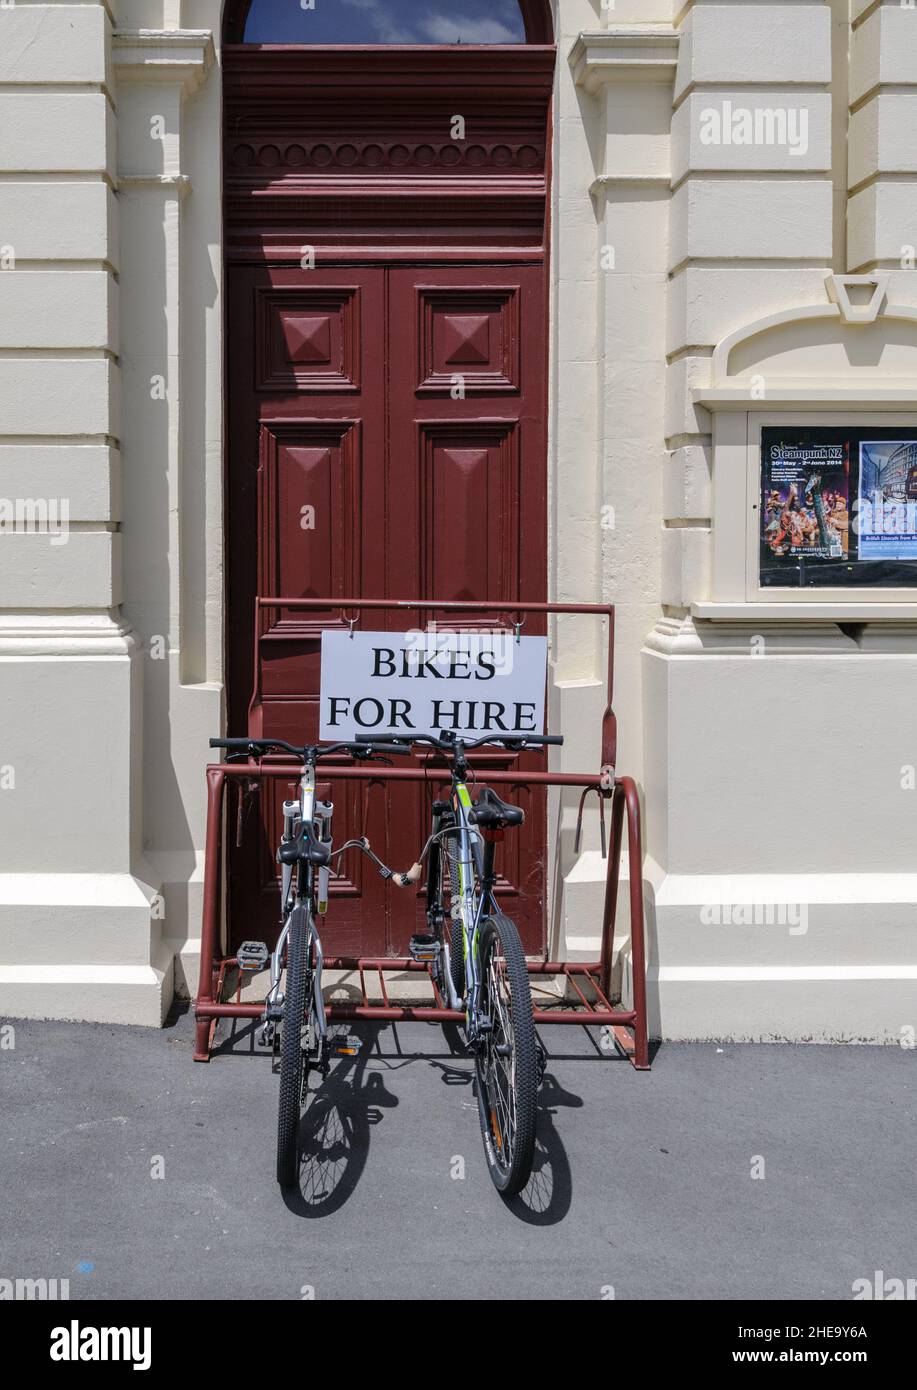 Bikes for hire by the tourist information in Oamaru New Zealand Stock Photo